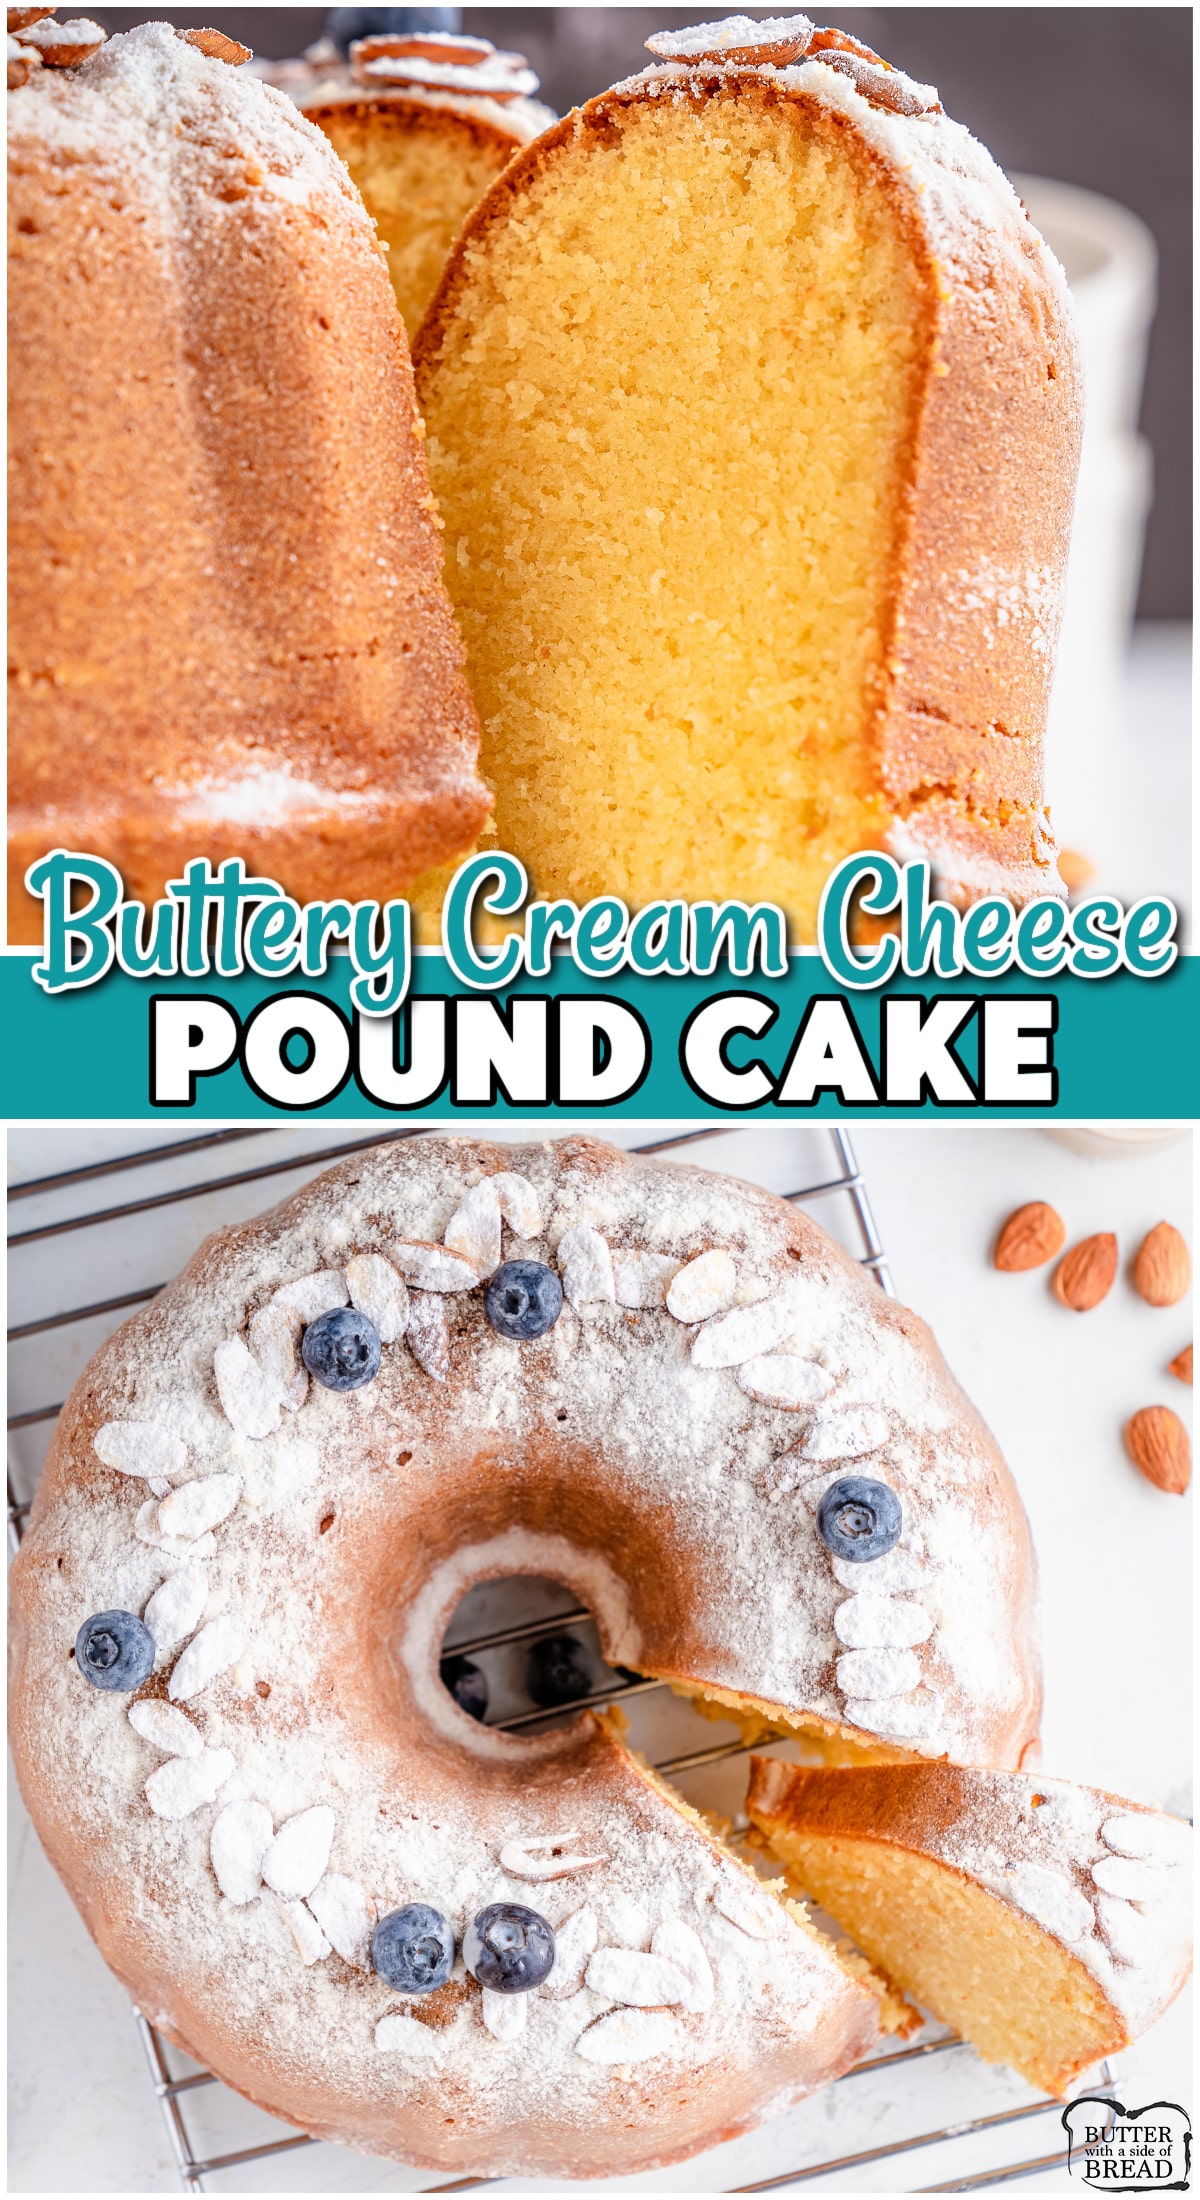 Buttery Cream Cheese Pound Cake has a light, moist texture and amazing butter almond vanilla flavors! Dust with powdered sugar and serve with fresh berries for a delightful treat! 